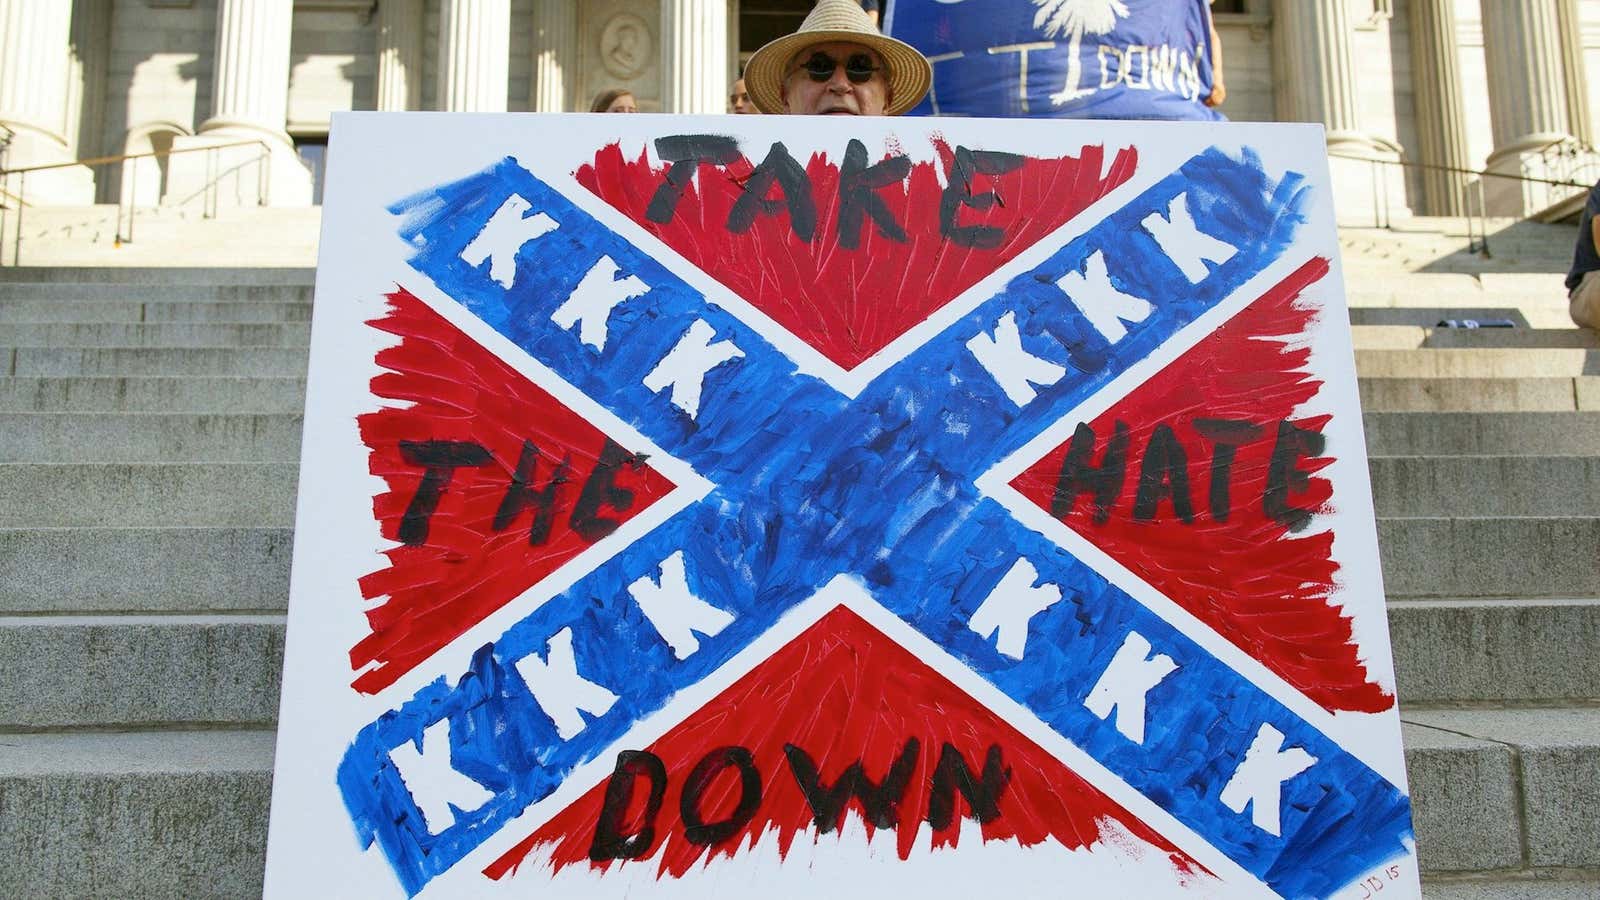 A protester calls for the Confederate flag in South Carolina’s state capitol to be taken down.